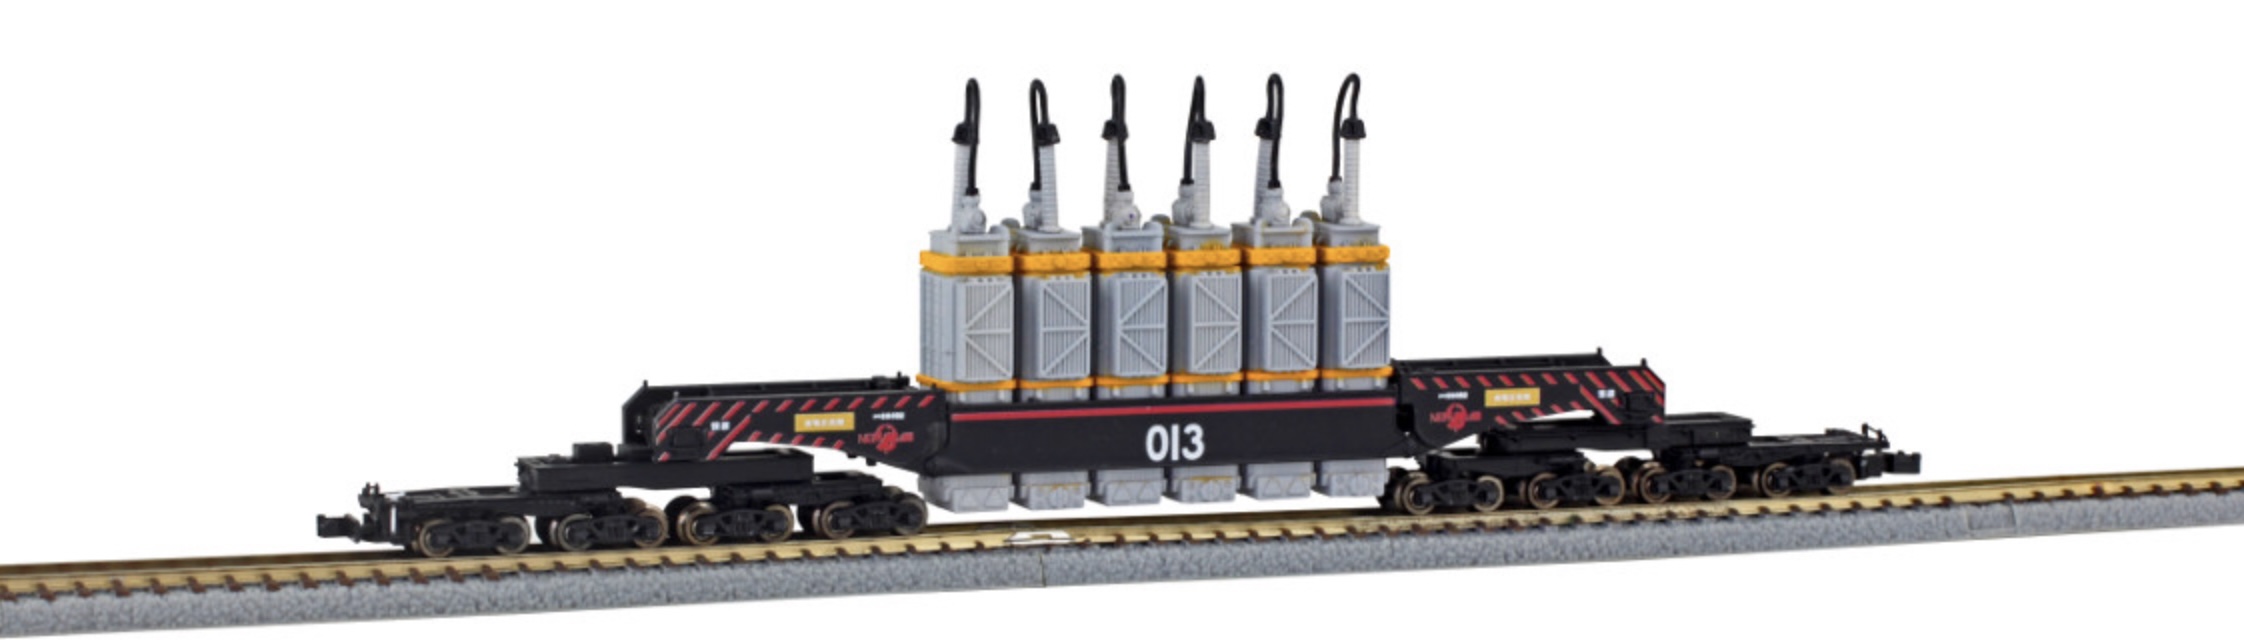 Z Scale - Rokuhan - T037-2 - Rolling Stock, Flatcar, SHIKI880, Transformer Transportation - Painted/Lettered - 013